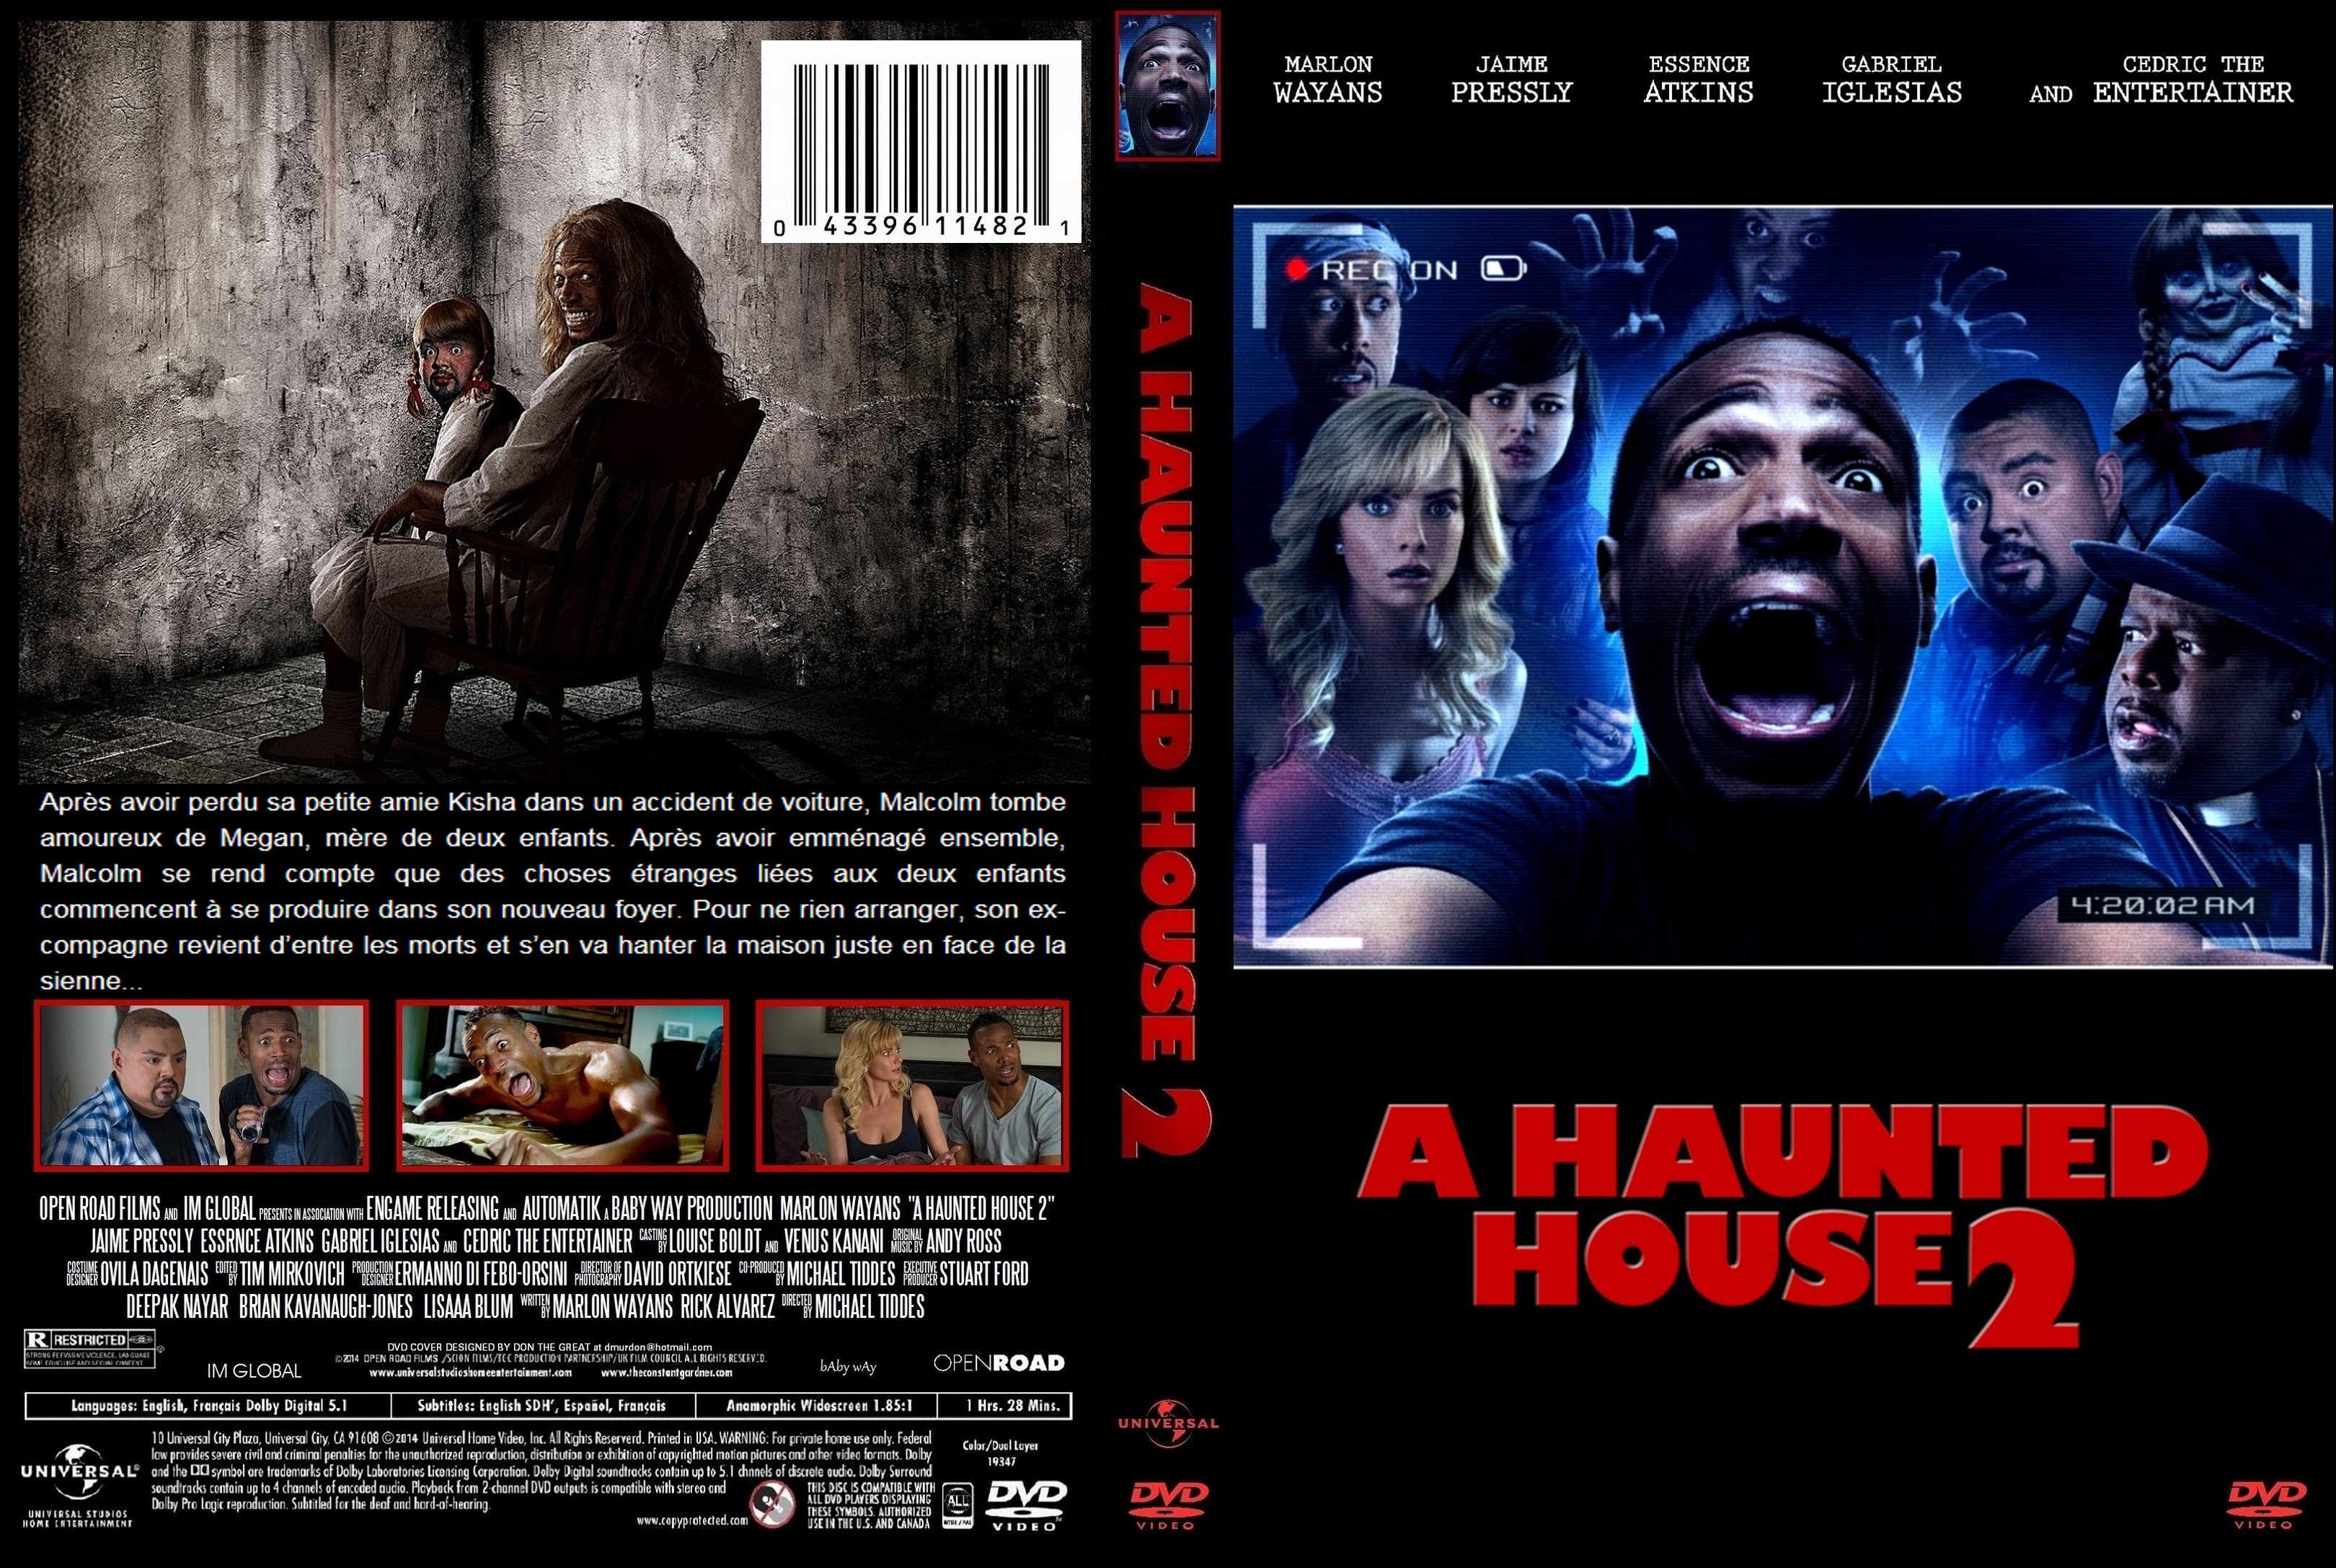 Jaquette DVD A Haunted House 2 custom